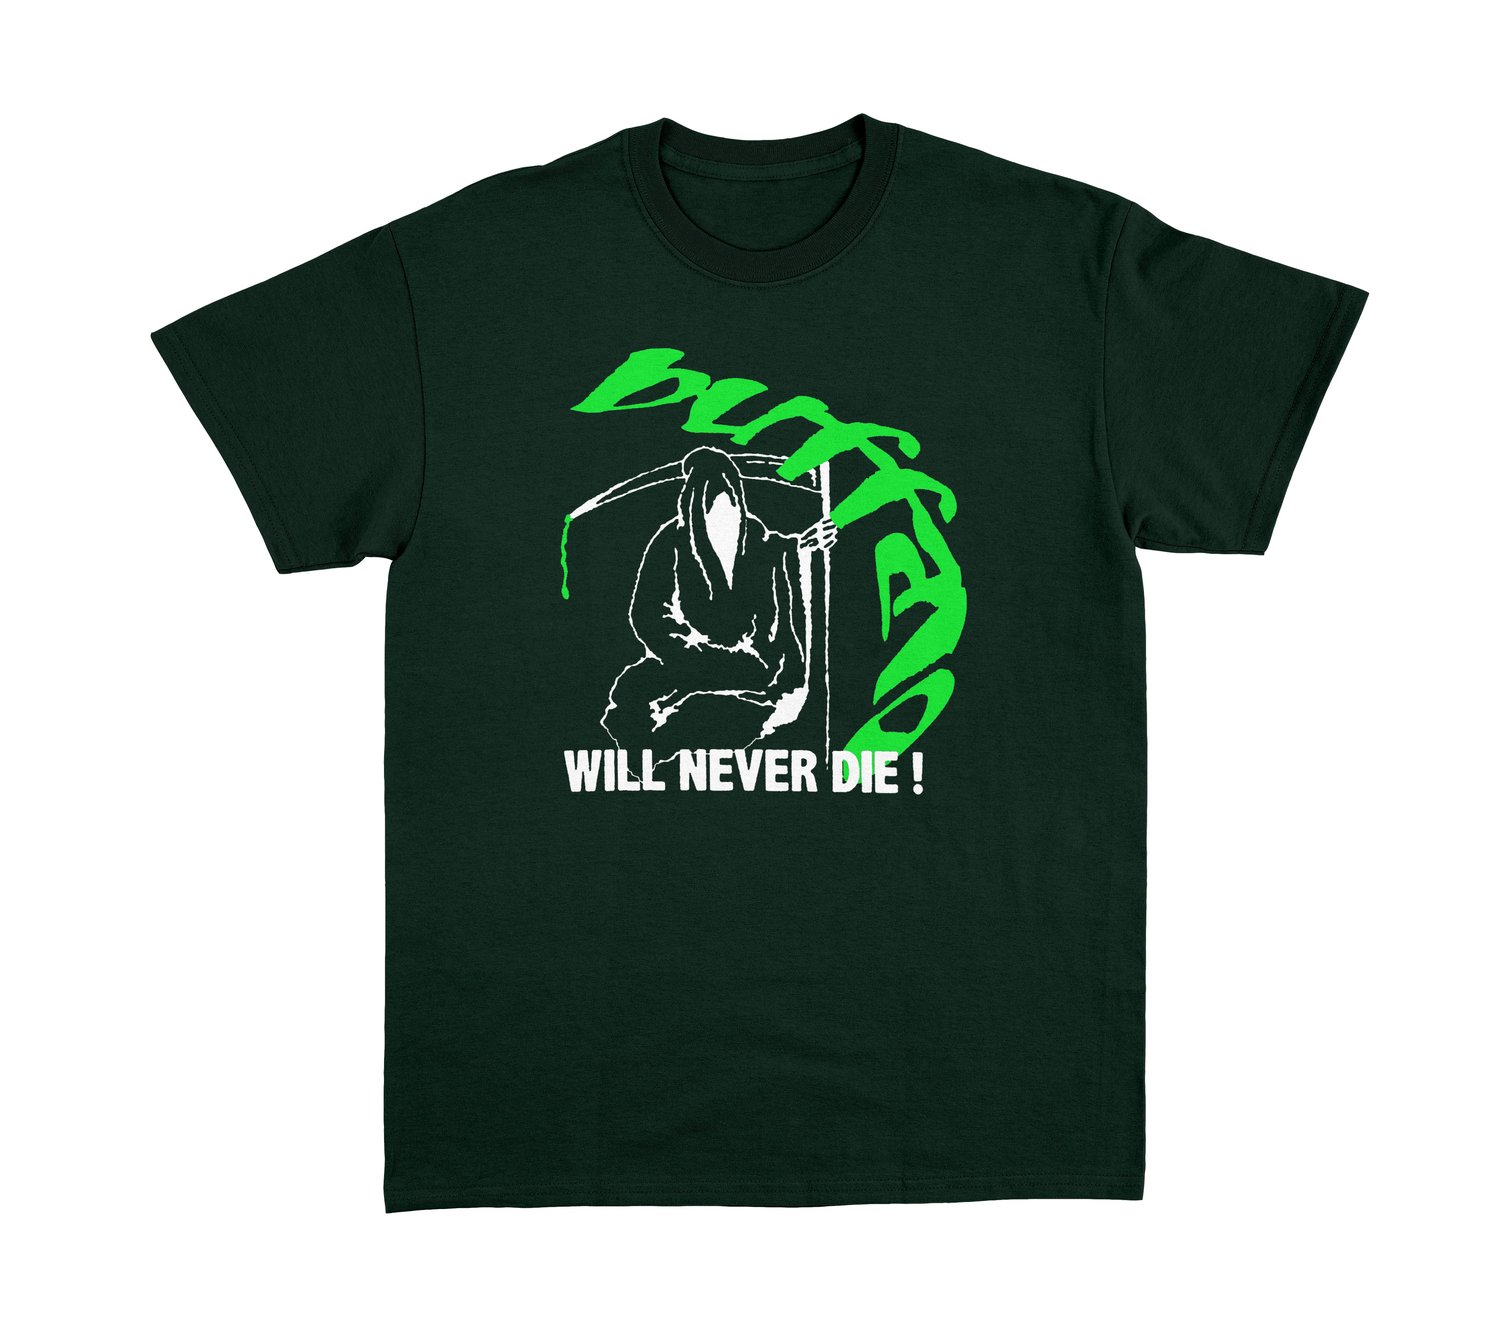 "I KNOW YOU HATE ME" GREEN TEE